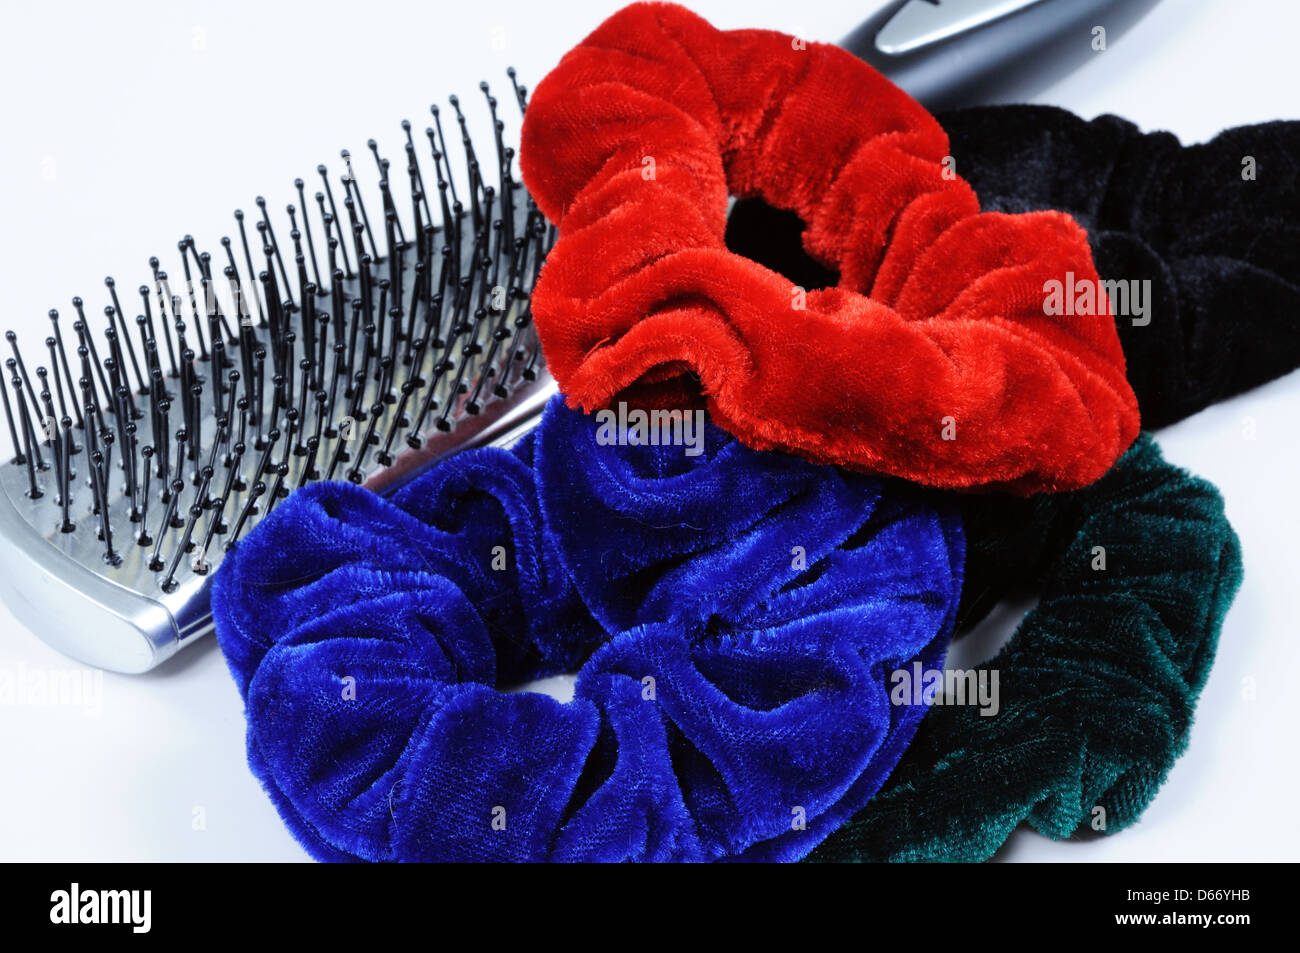 Four velvet hair scrunchies and a hairbrush against a white background. Stock Photo